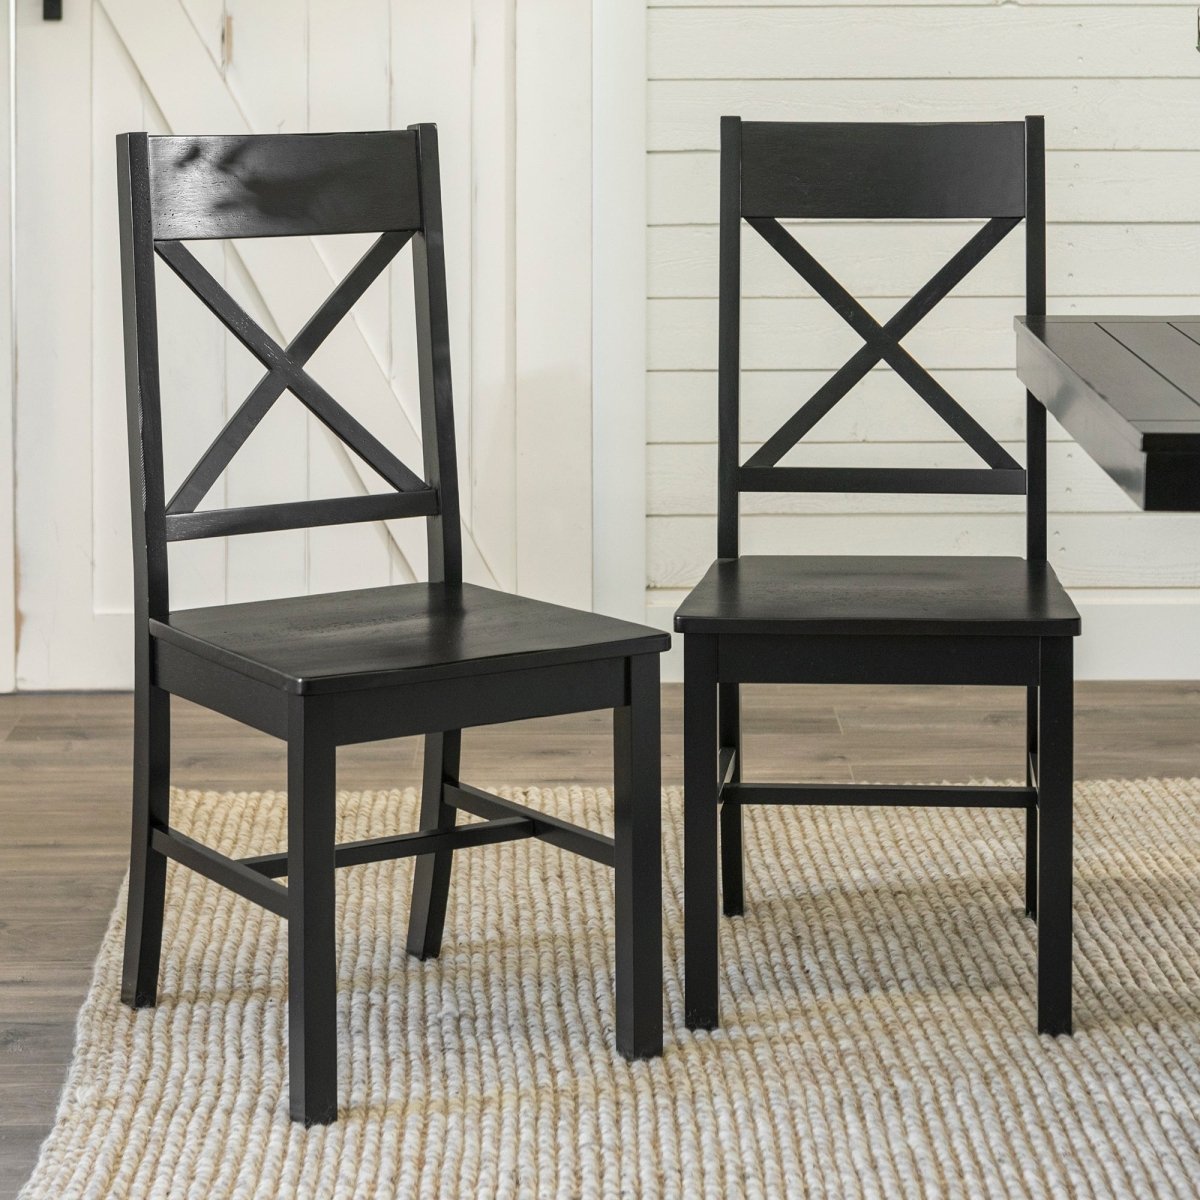 Walker Edison Millwright Dining Chair, Set of 2 - lily & onyx